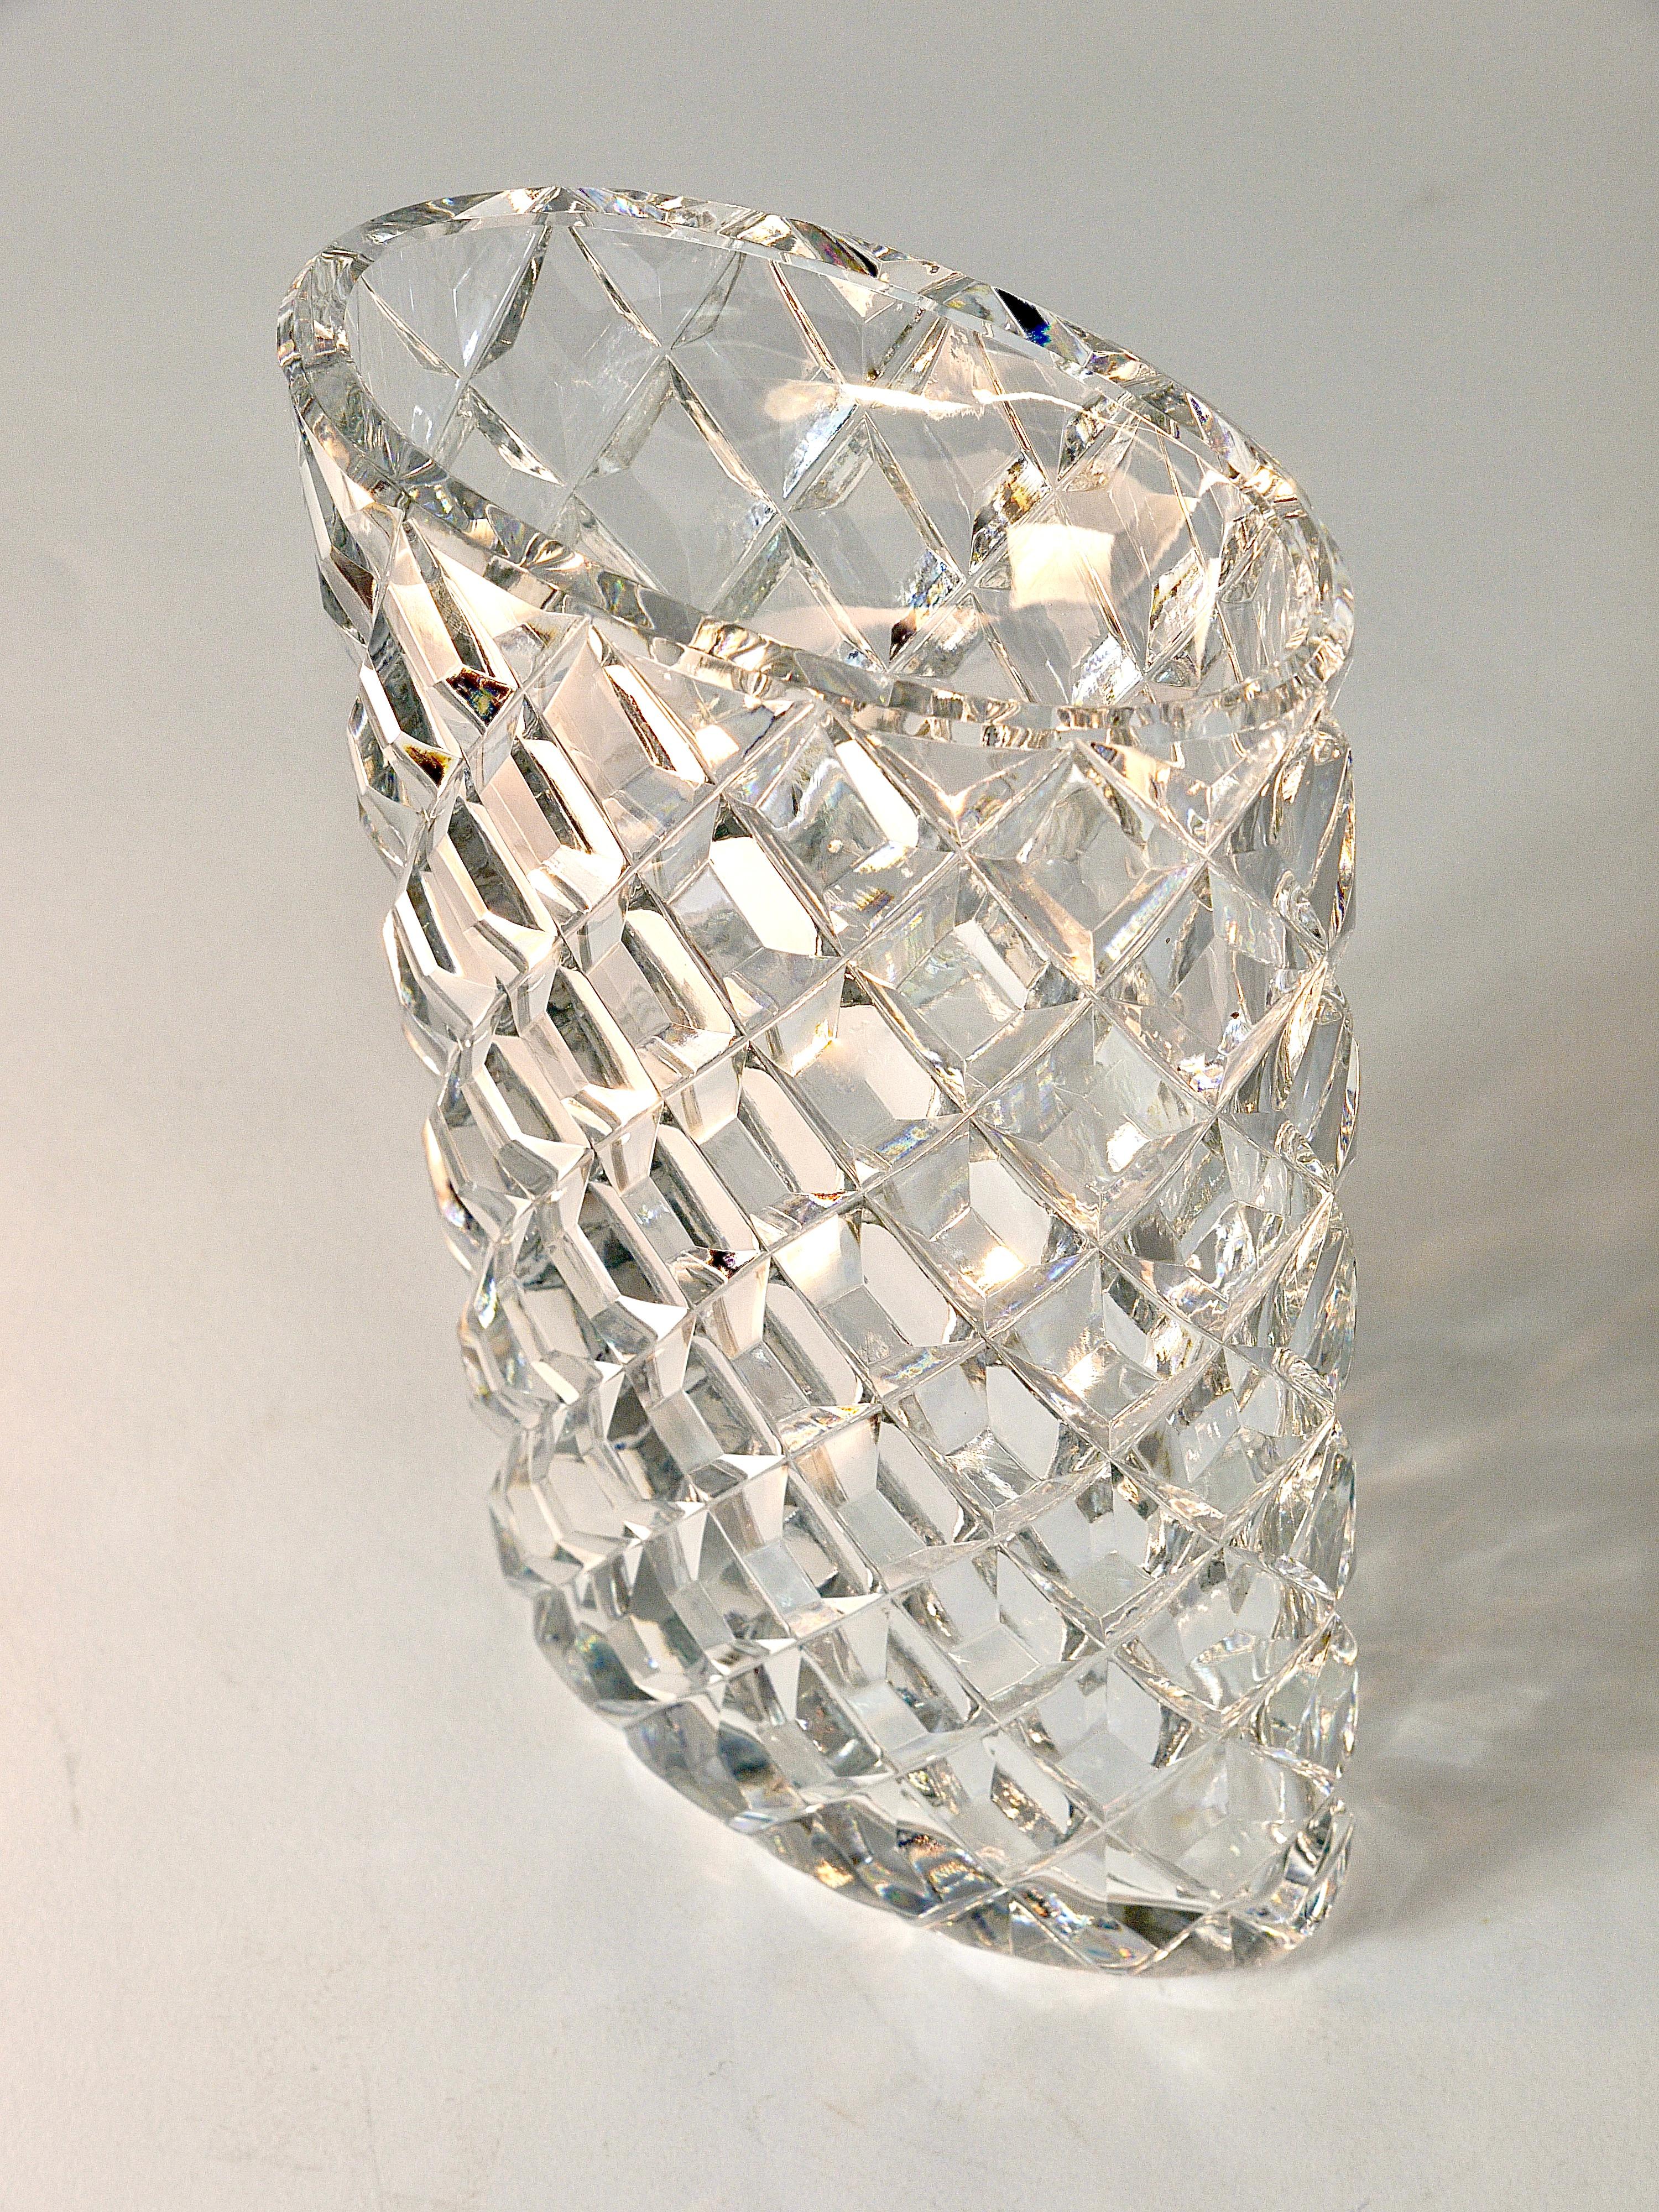 Sparkling Facetted Crystal Glass Vase by Claus Josef Riedel, Austria, 1970s For Sale 9